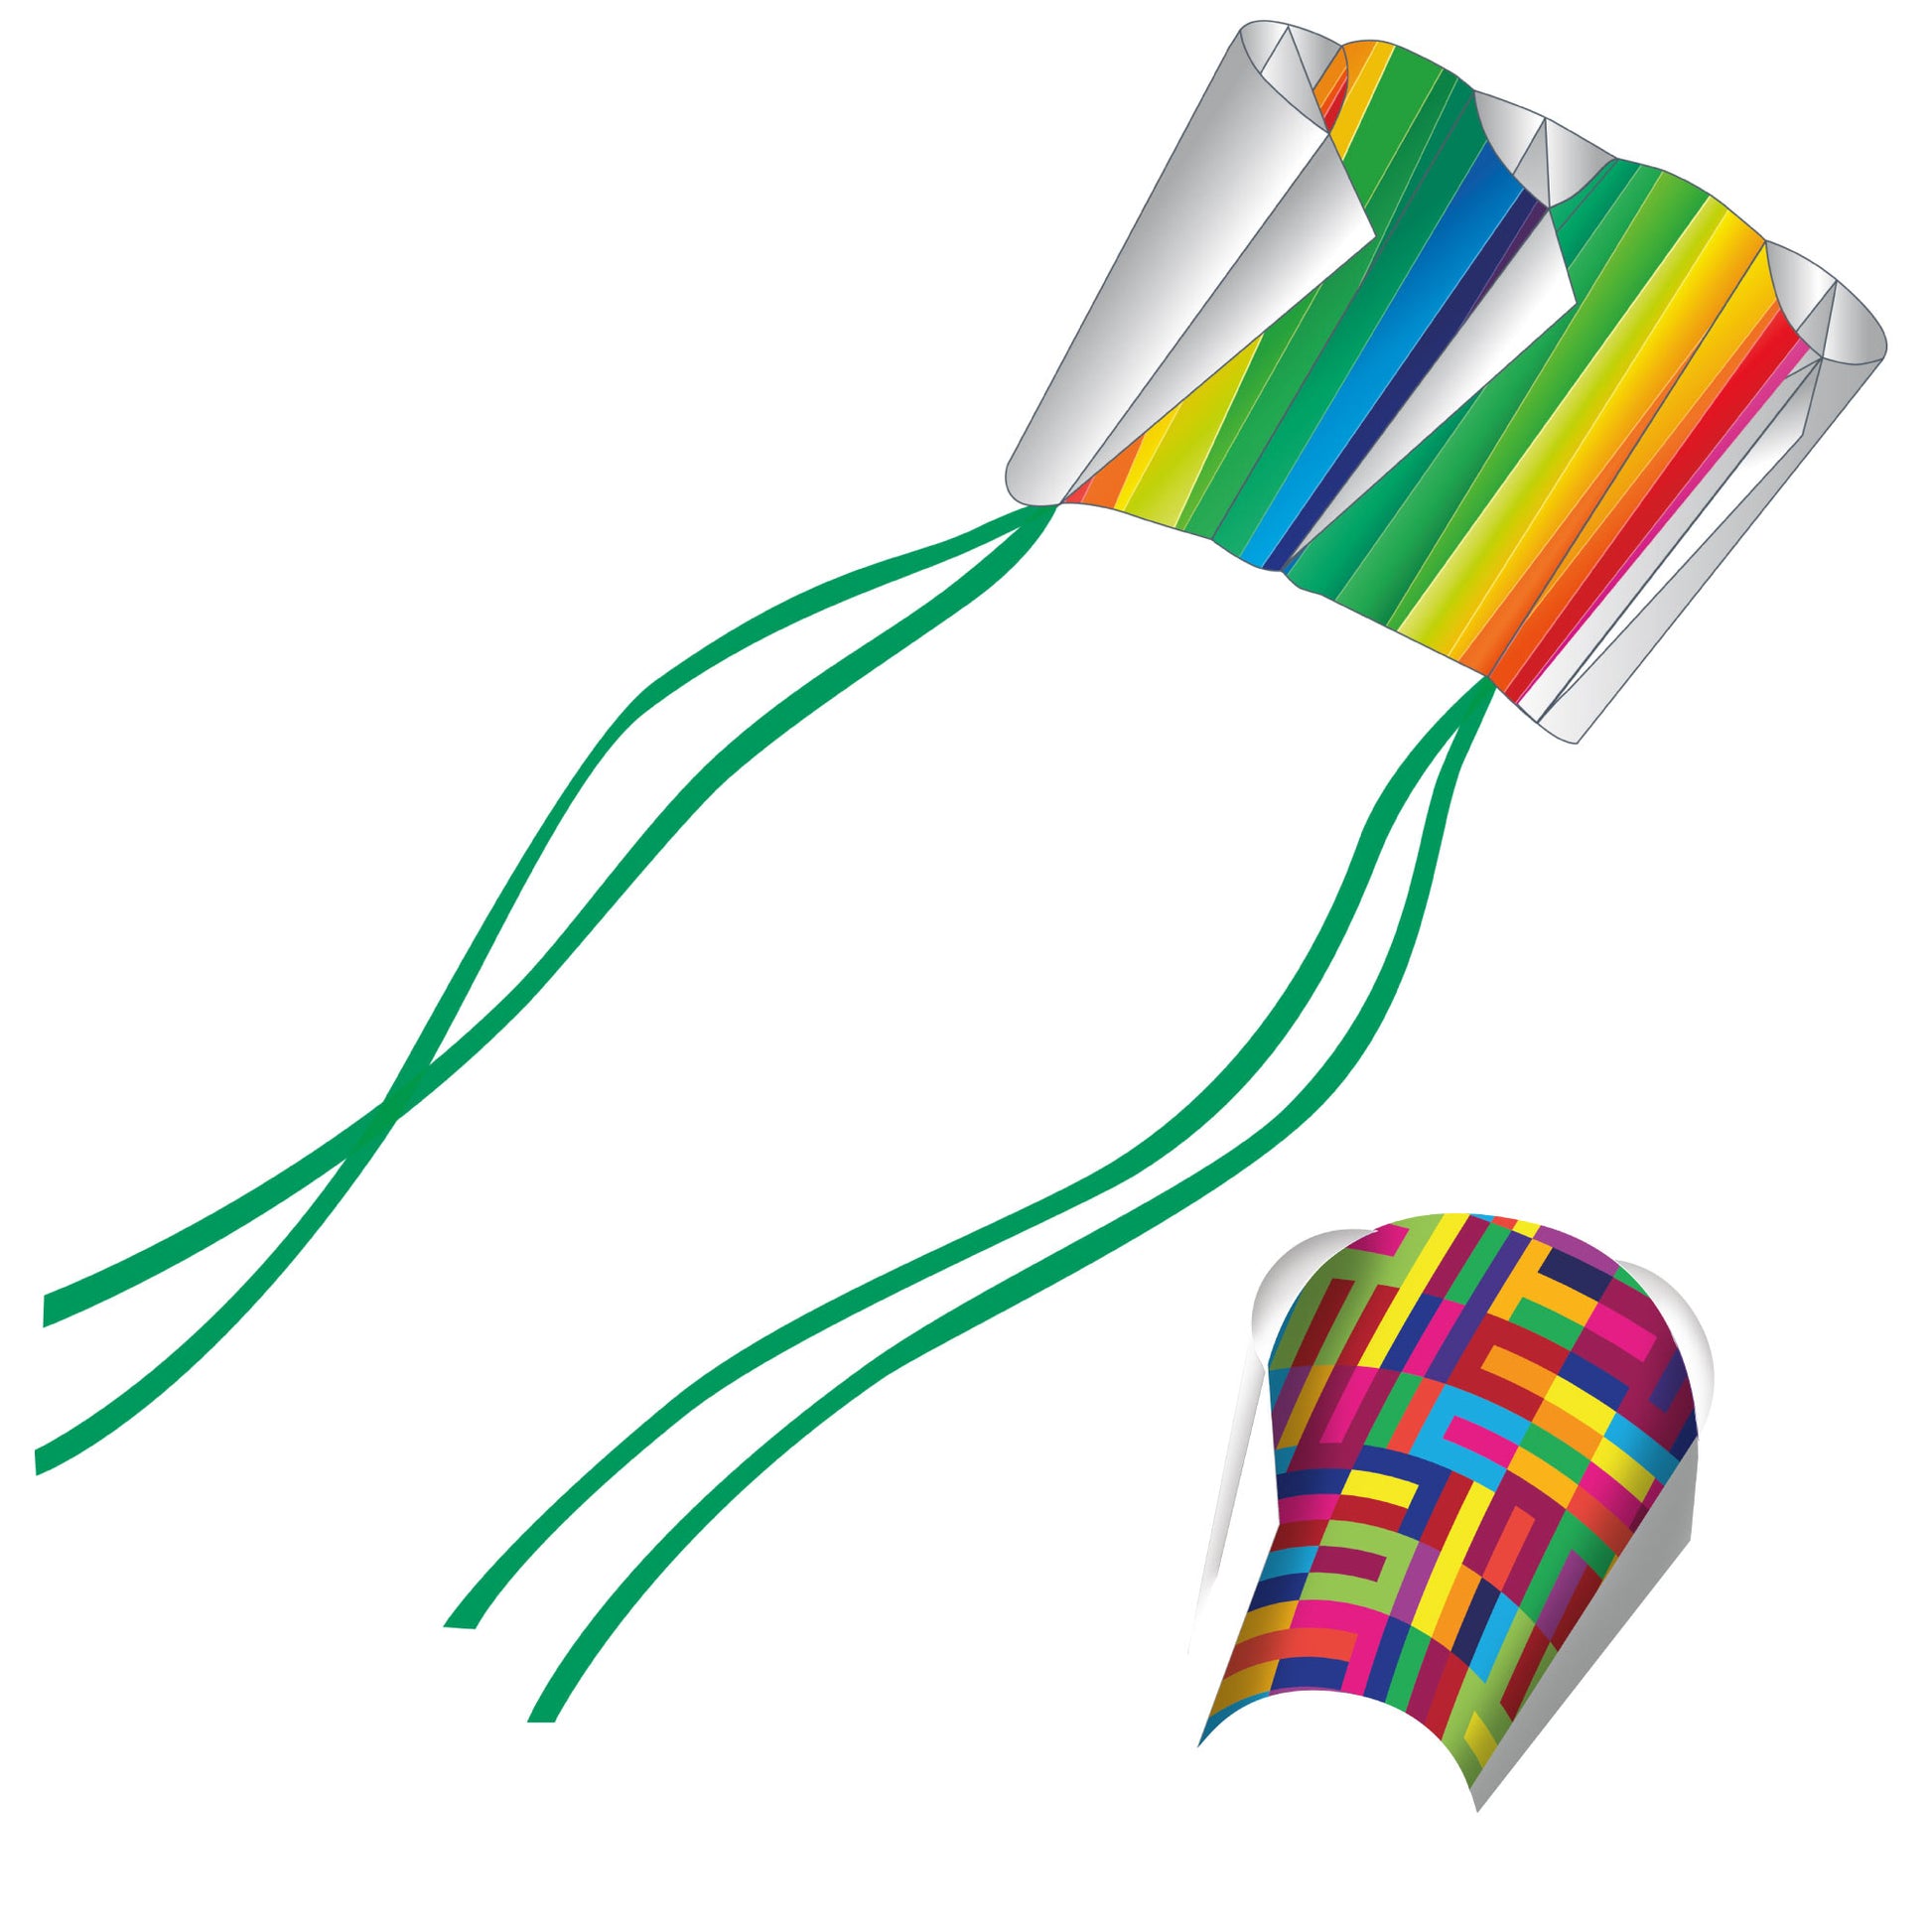 X Kites SkyFoil Rainbow + Pocket Kite Abstract Parafoil Kite Bundle - No Assembly Required Product Image